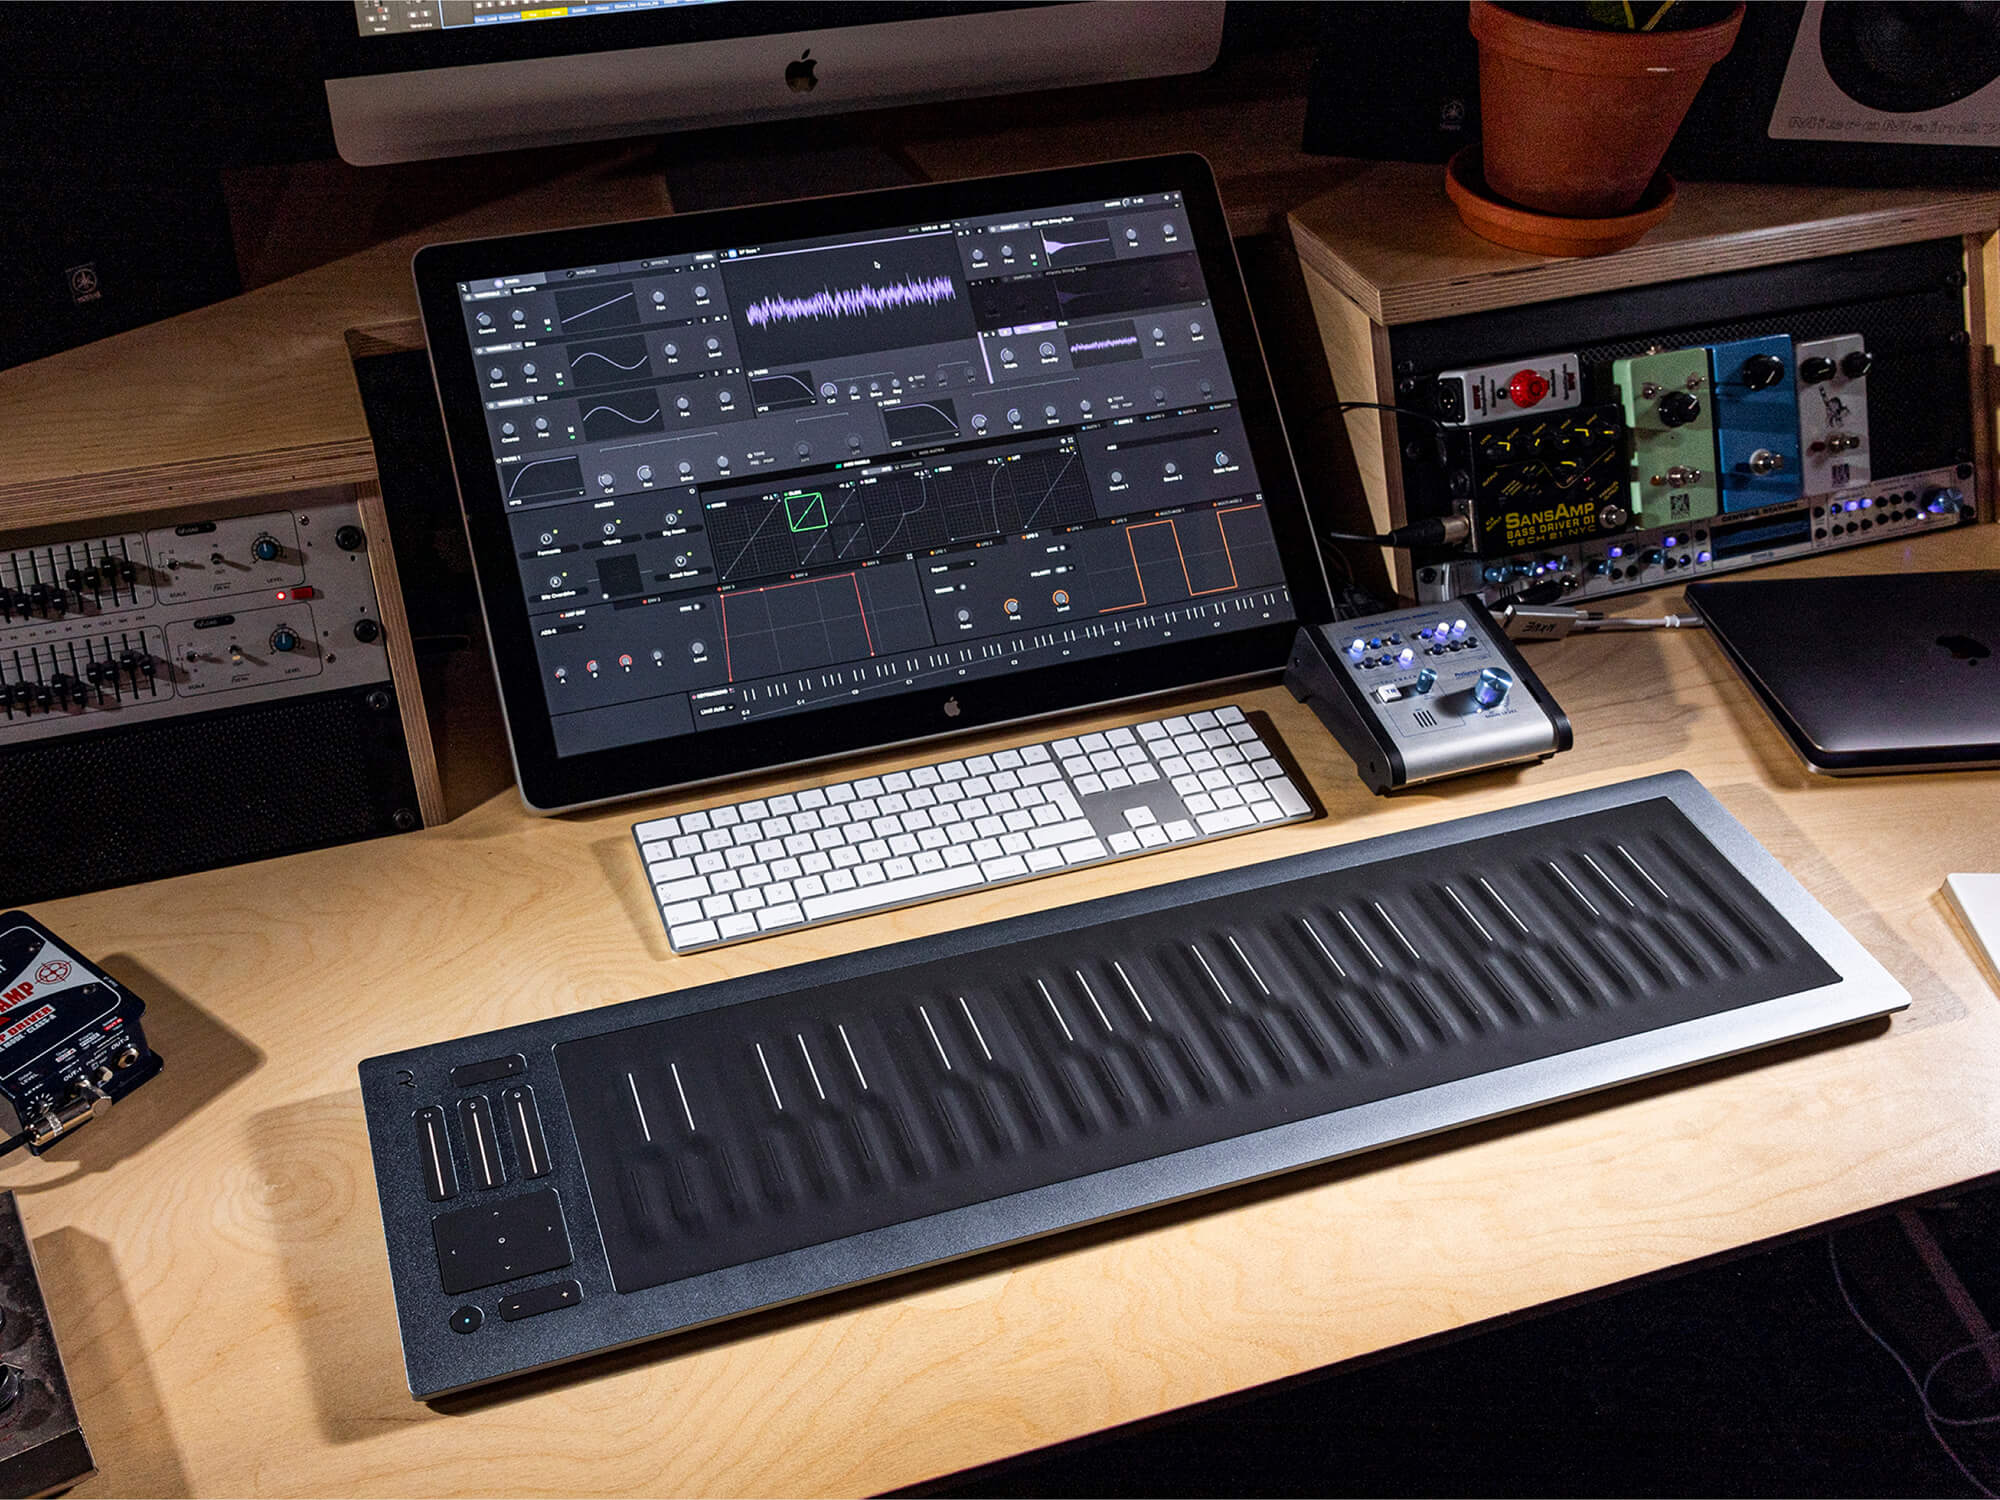 ROLI Seaboard RISE 2: Everything you need to know about ROLI's new MPE keyboard | MusicTech